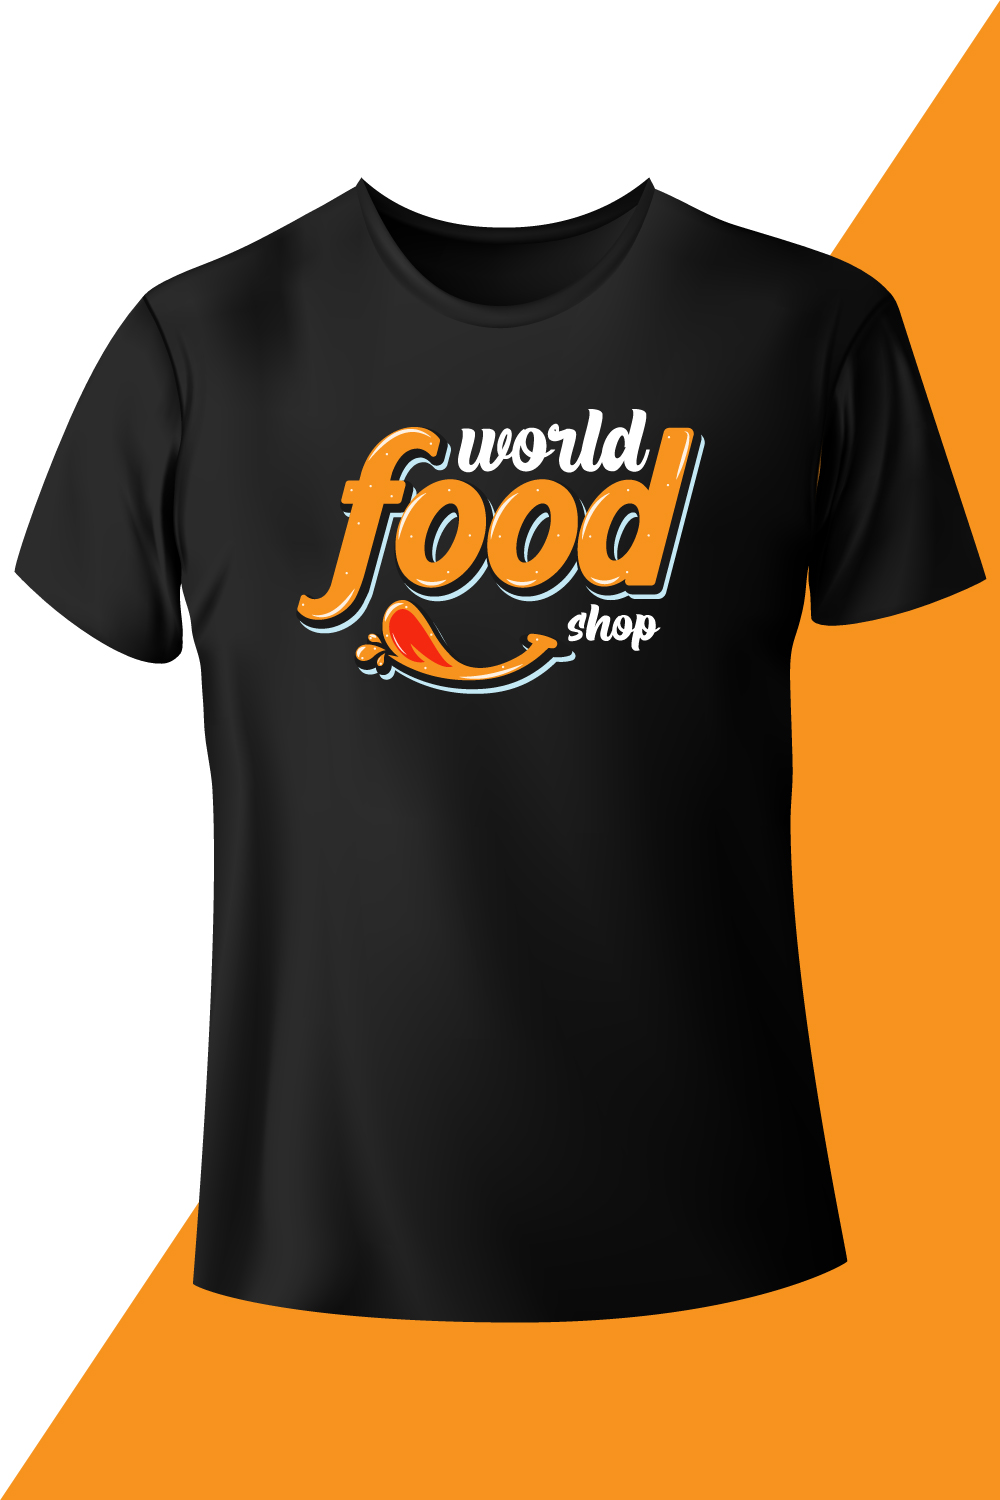 Image of a black t-shirt with an amazing inscription world food shop.